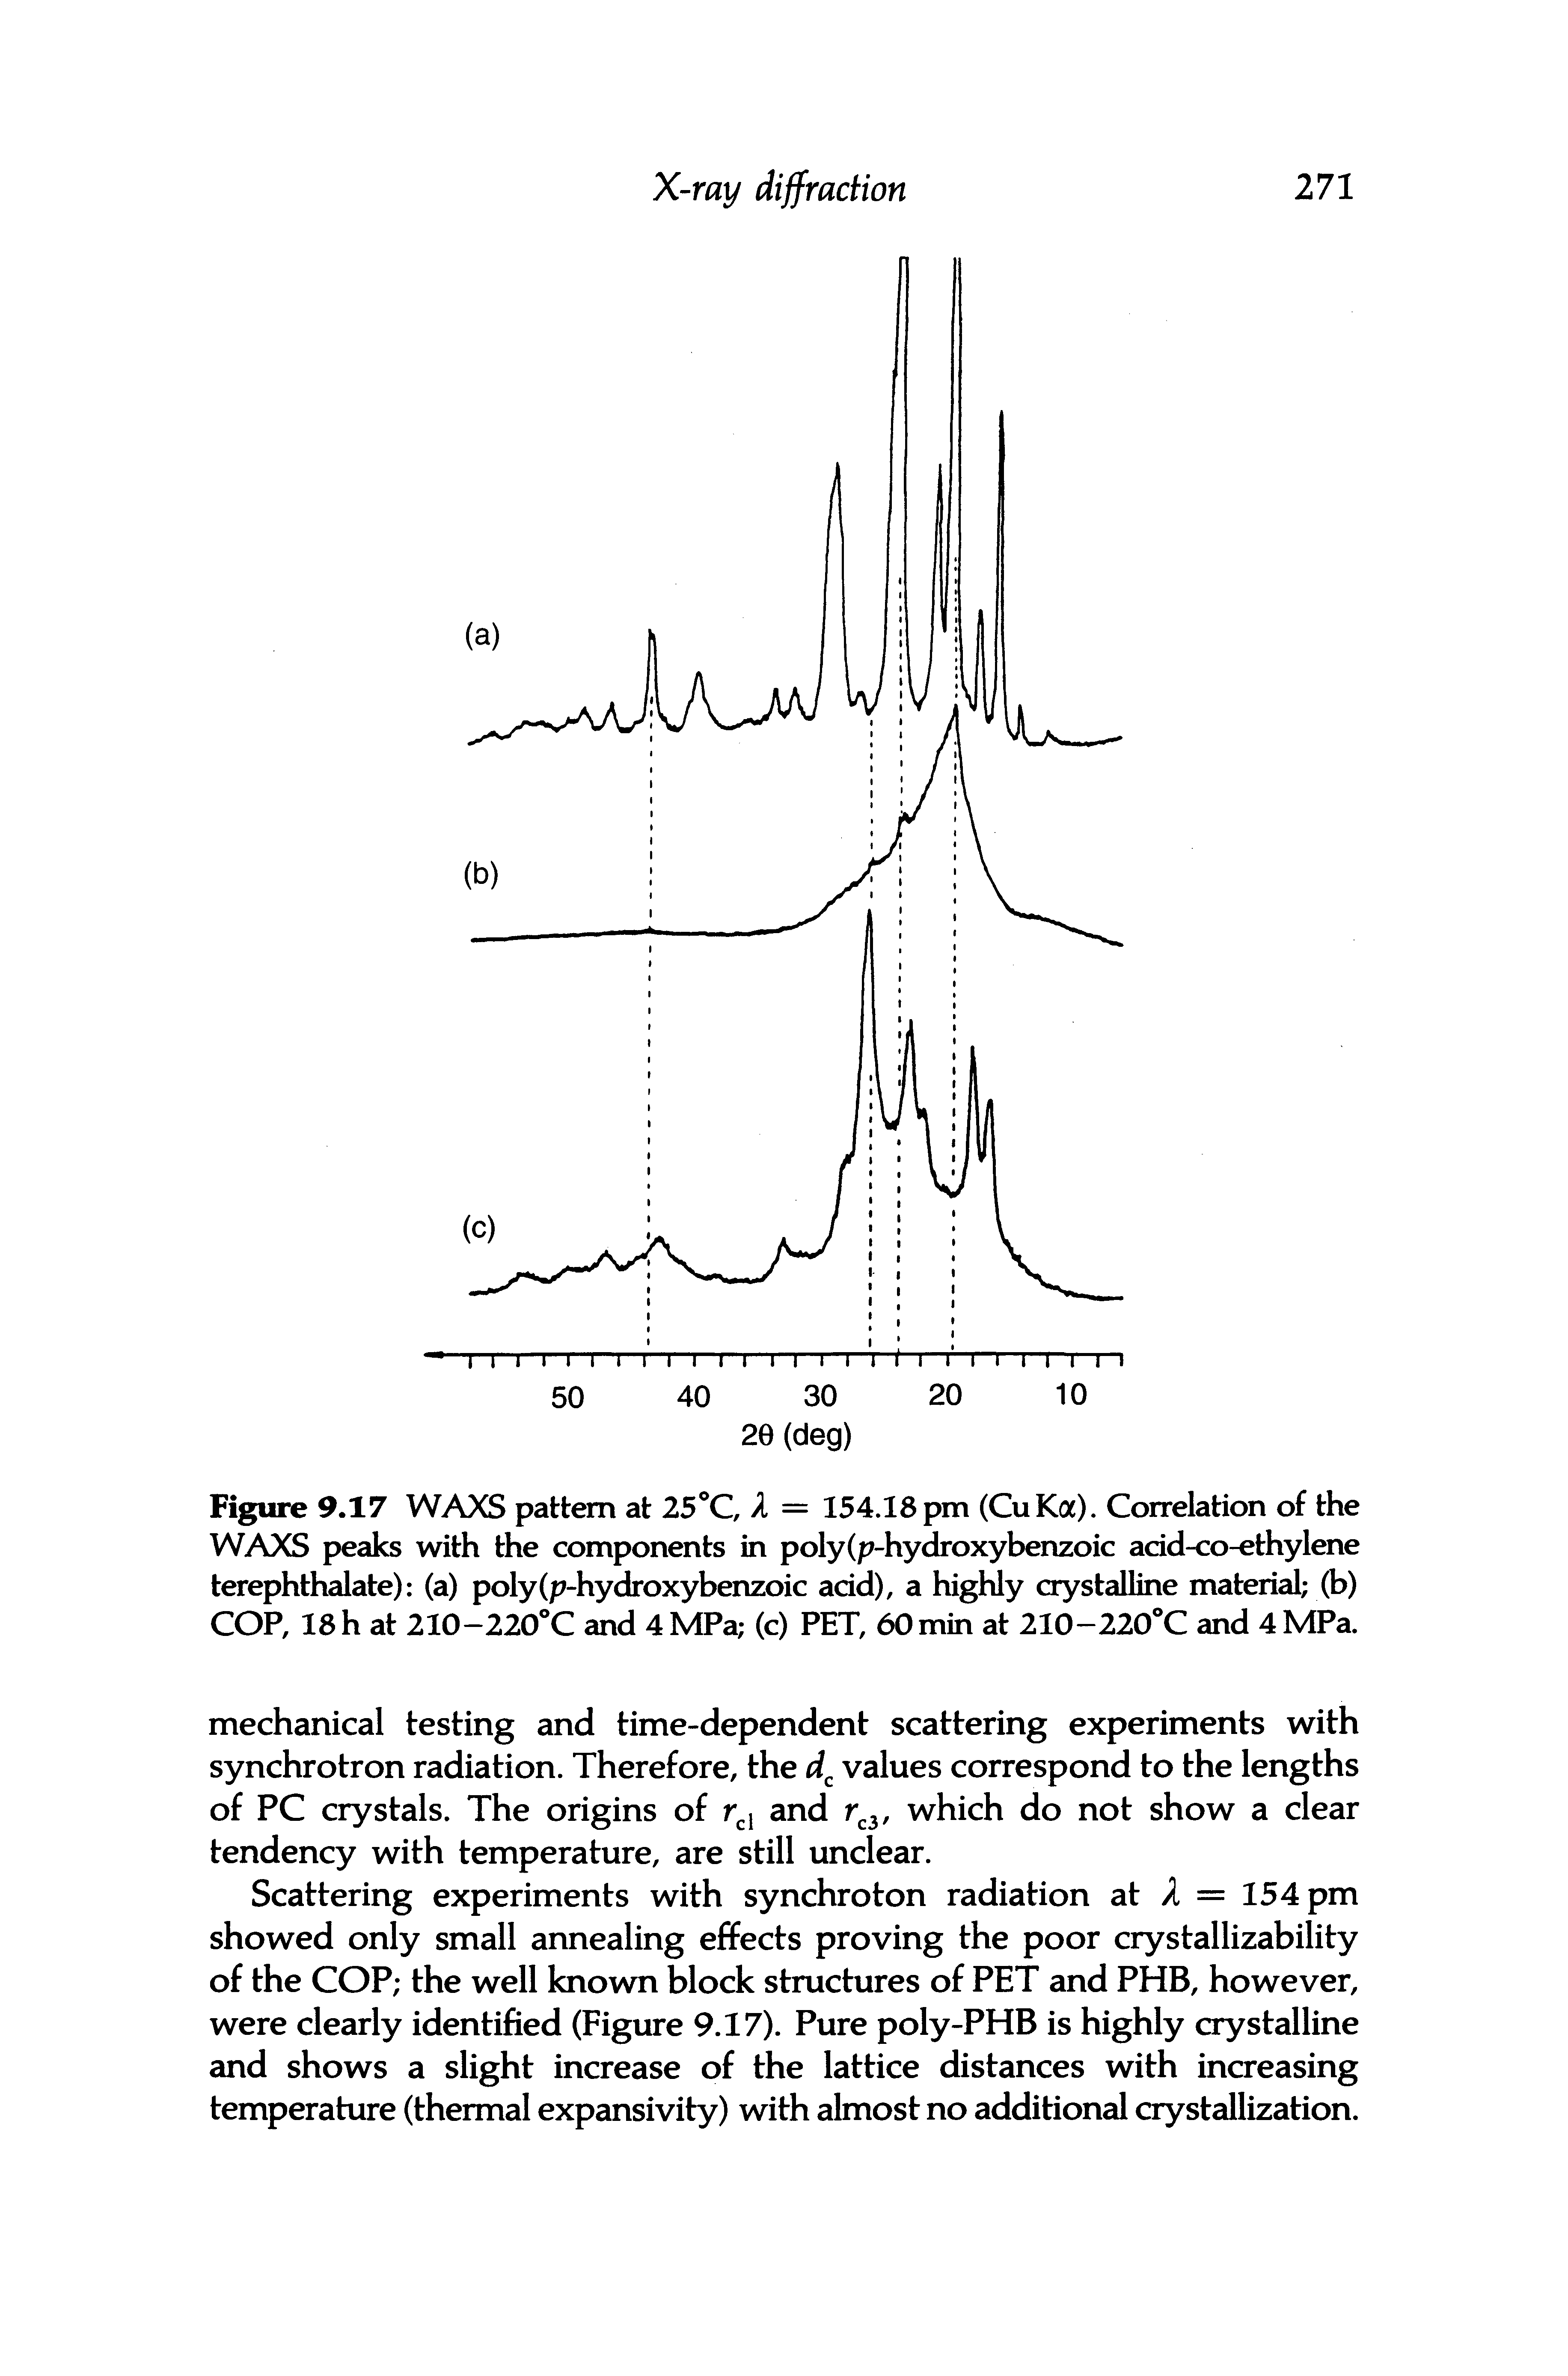 Figure 9.17 WAXS pattern at 25 C A = 154.18 pm (CuKa). Correlation of the WAXS peaks with the components in poly(p-hydroxybenzoic acid-co-ethylene terephthalate) (a) poly(p-hydroxybenzoic acid), a highly crystalline material (b) COP, 18h at 210-220 C and 4 MPa (c) PET, 60 min at 210-220 C and 4 MPa.